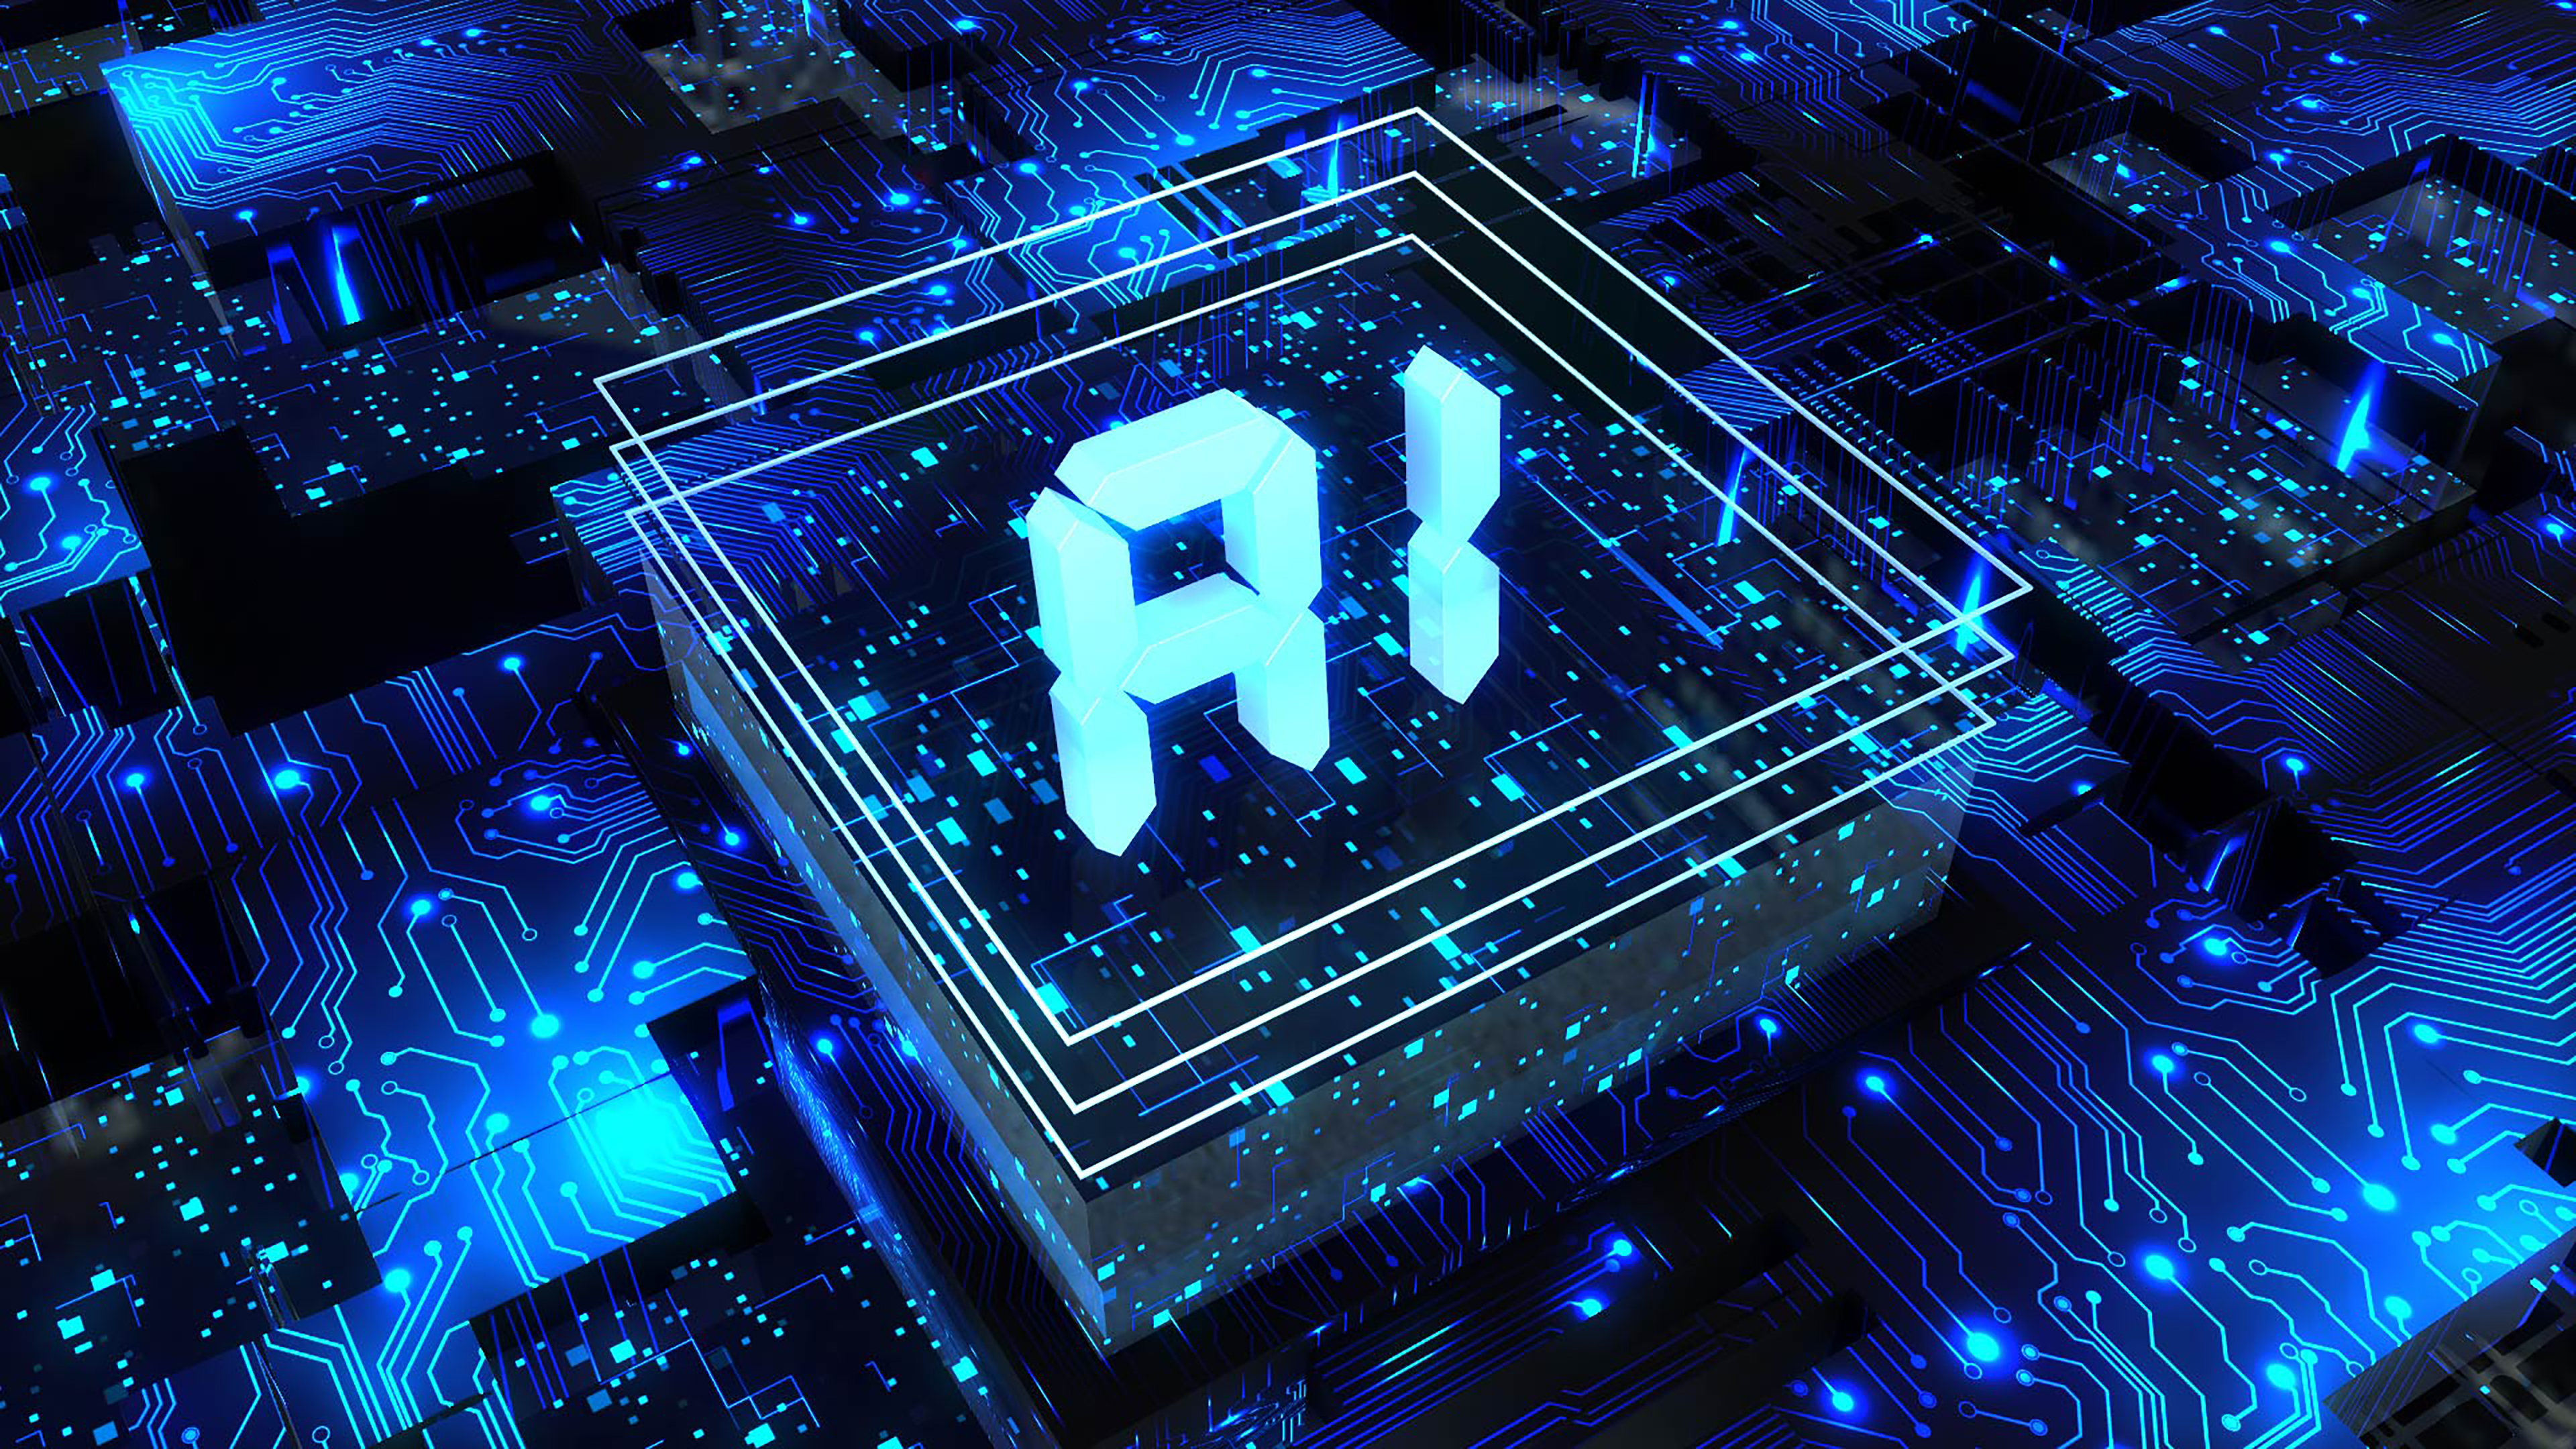 "AI" written on top of a semiconductor.